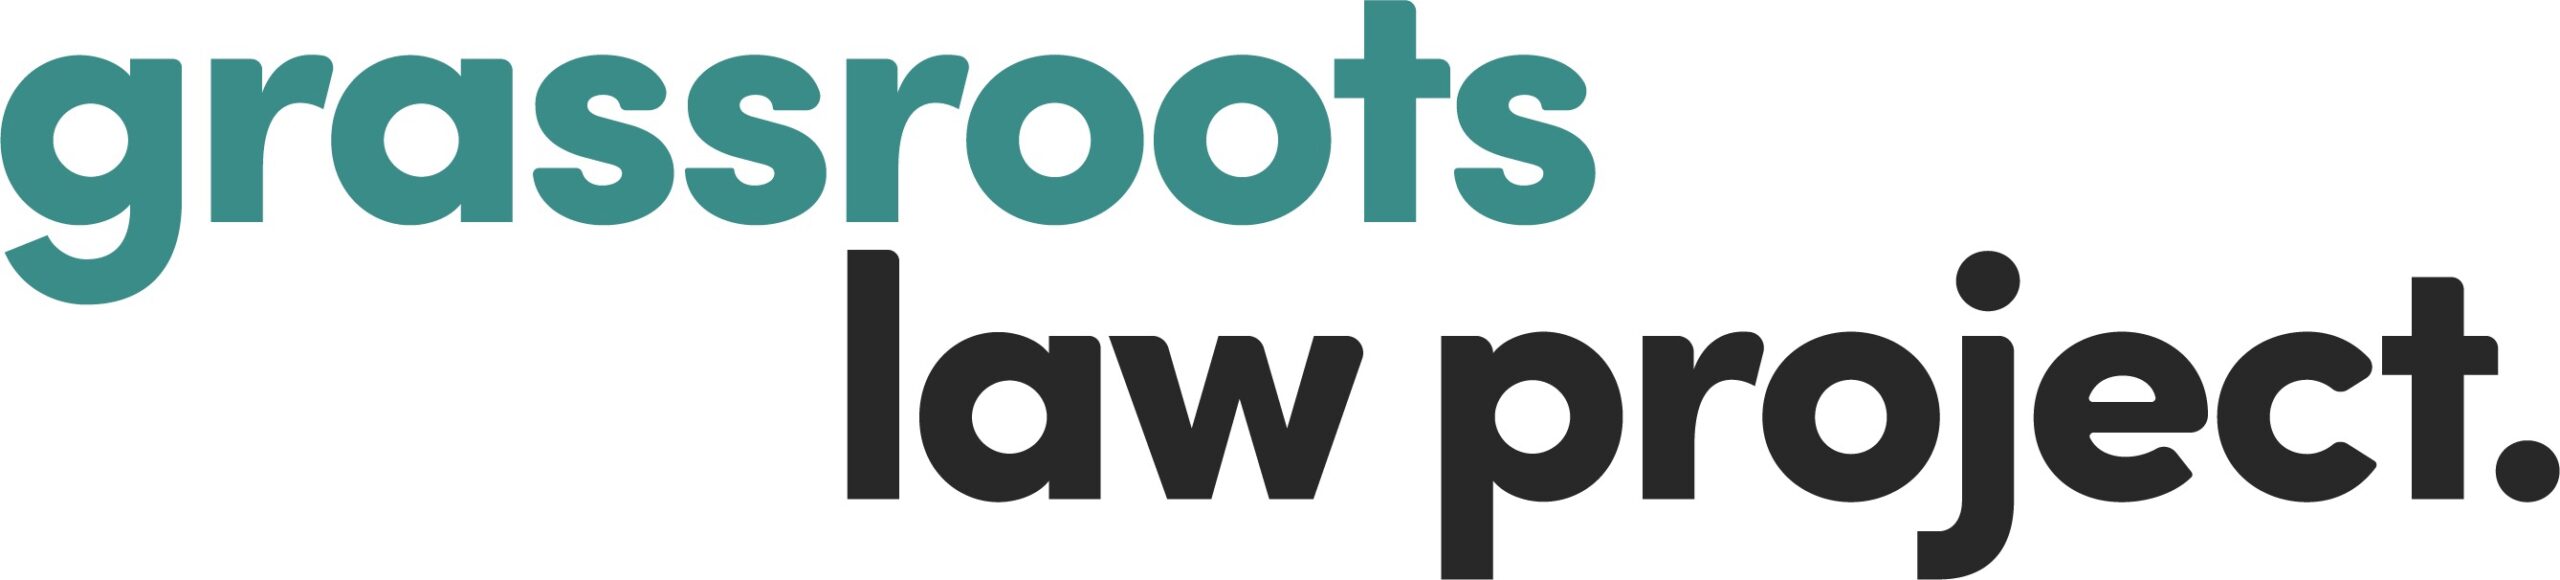 Grassroots law project logo